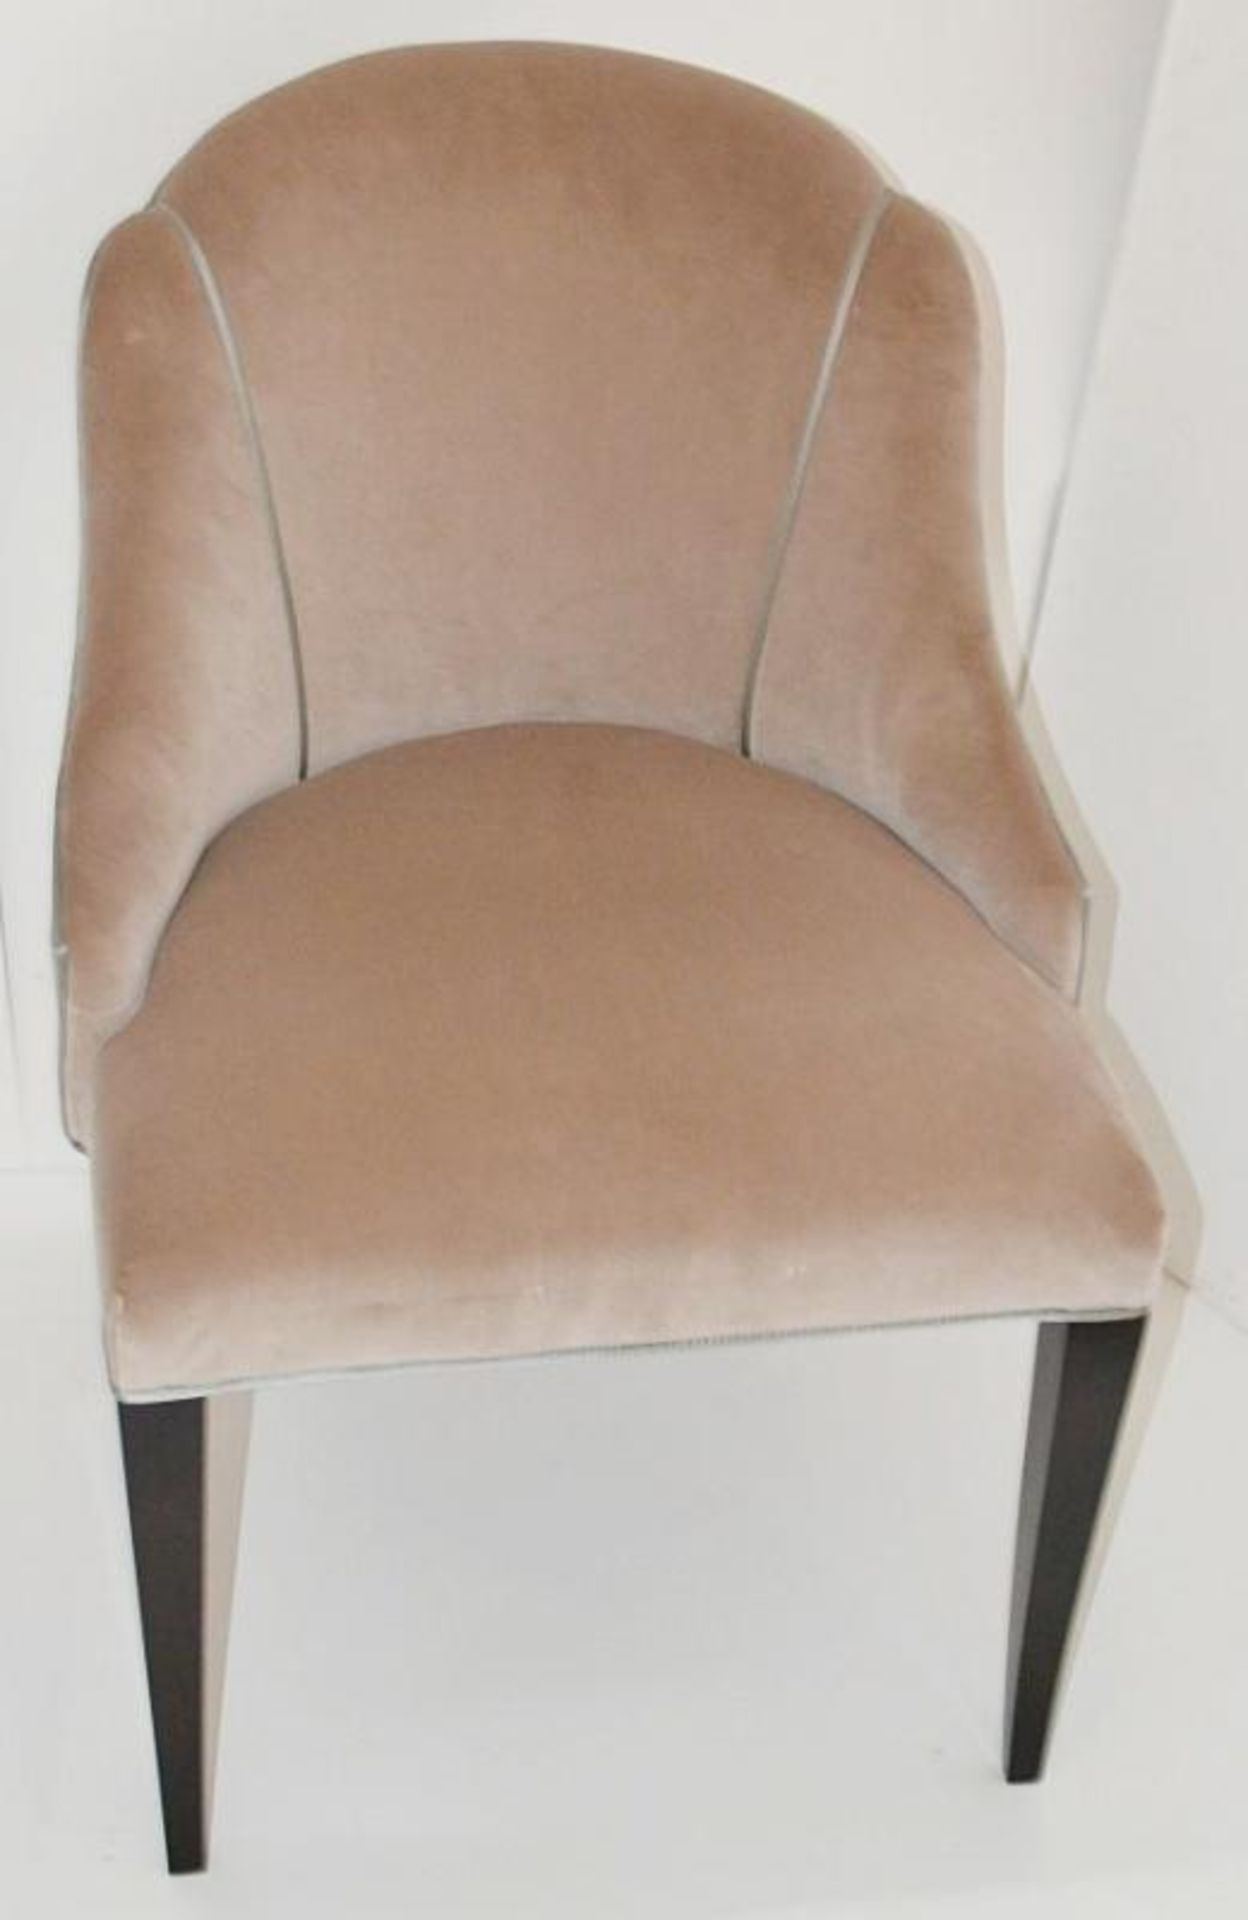 1 x REED &amp; RACKSTRAW "Cloud" Handcrafted Velvet Upholstered Chair - Dimensions: H87 x W58 x D5 - Image 3 of 14